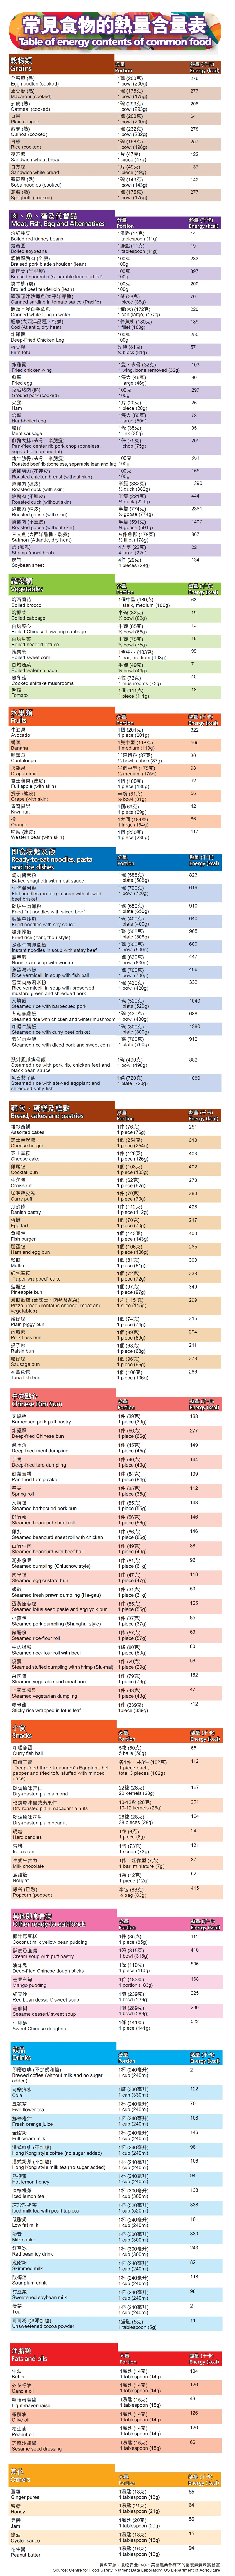 Table of energy contents of common food